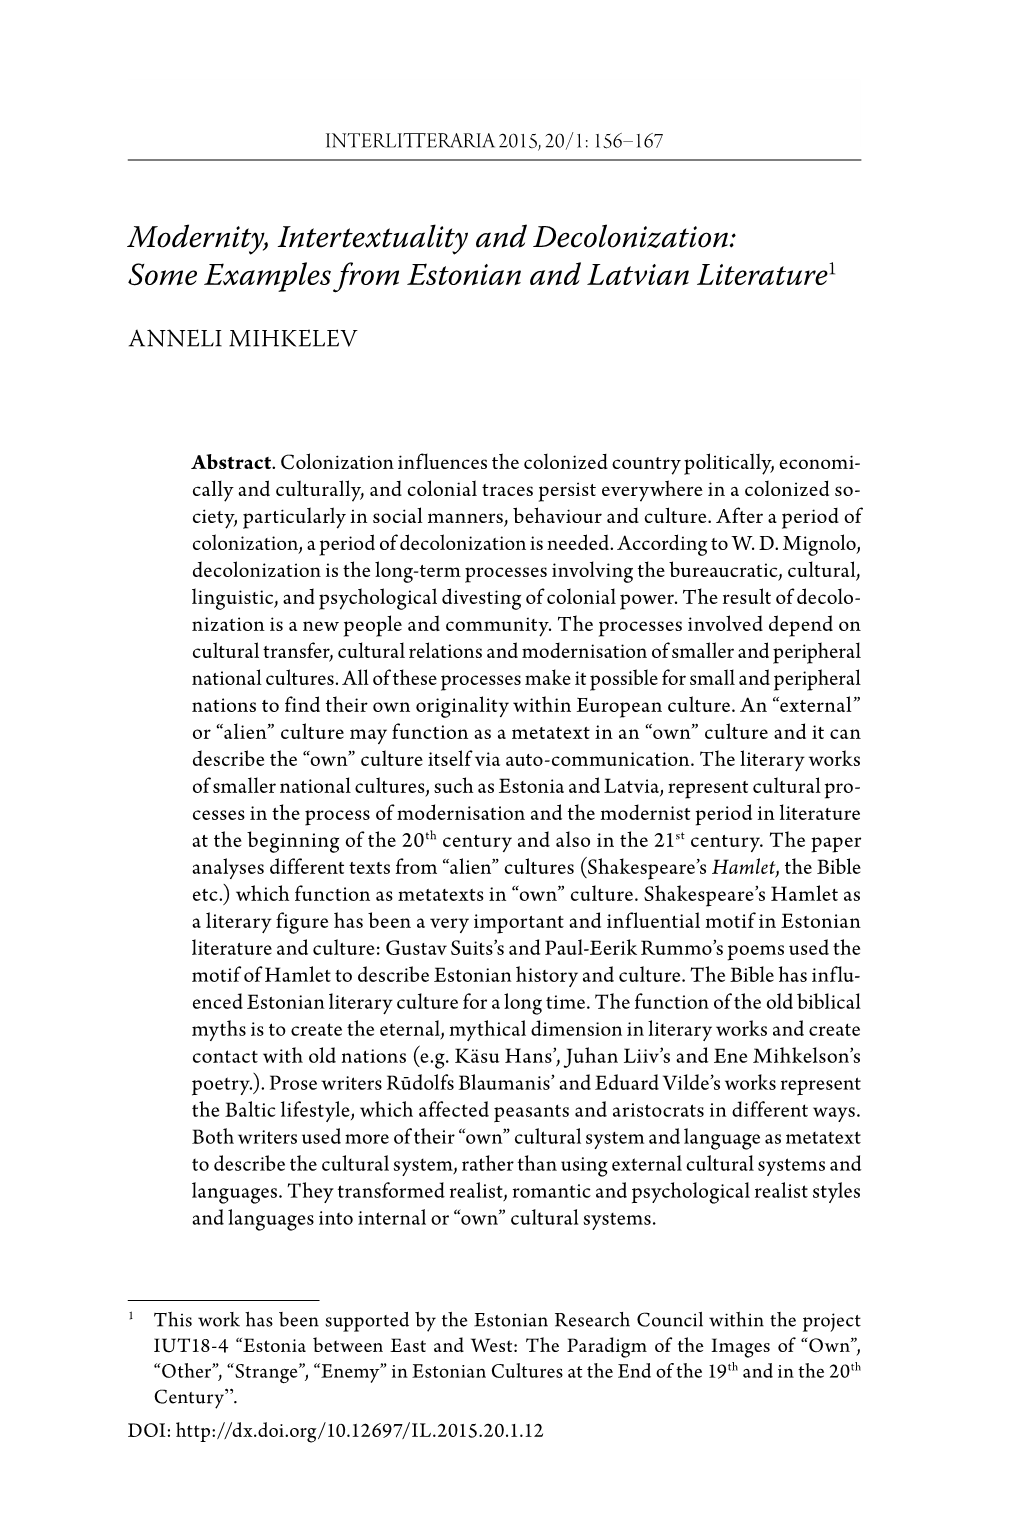 Modernity, Intertextuality and Decolonization: Some Examples from Estonian and Latvian Literature1